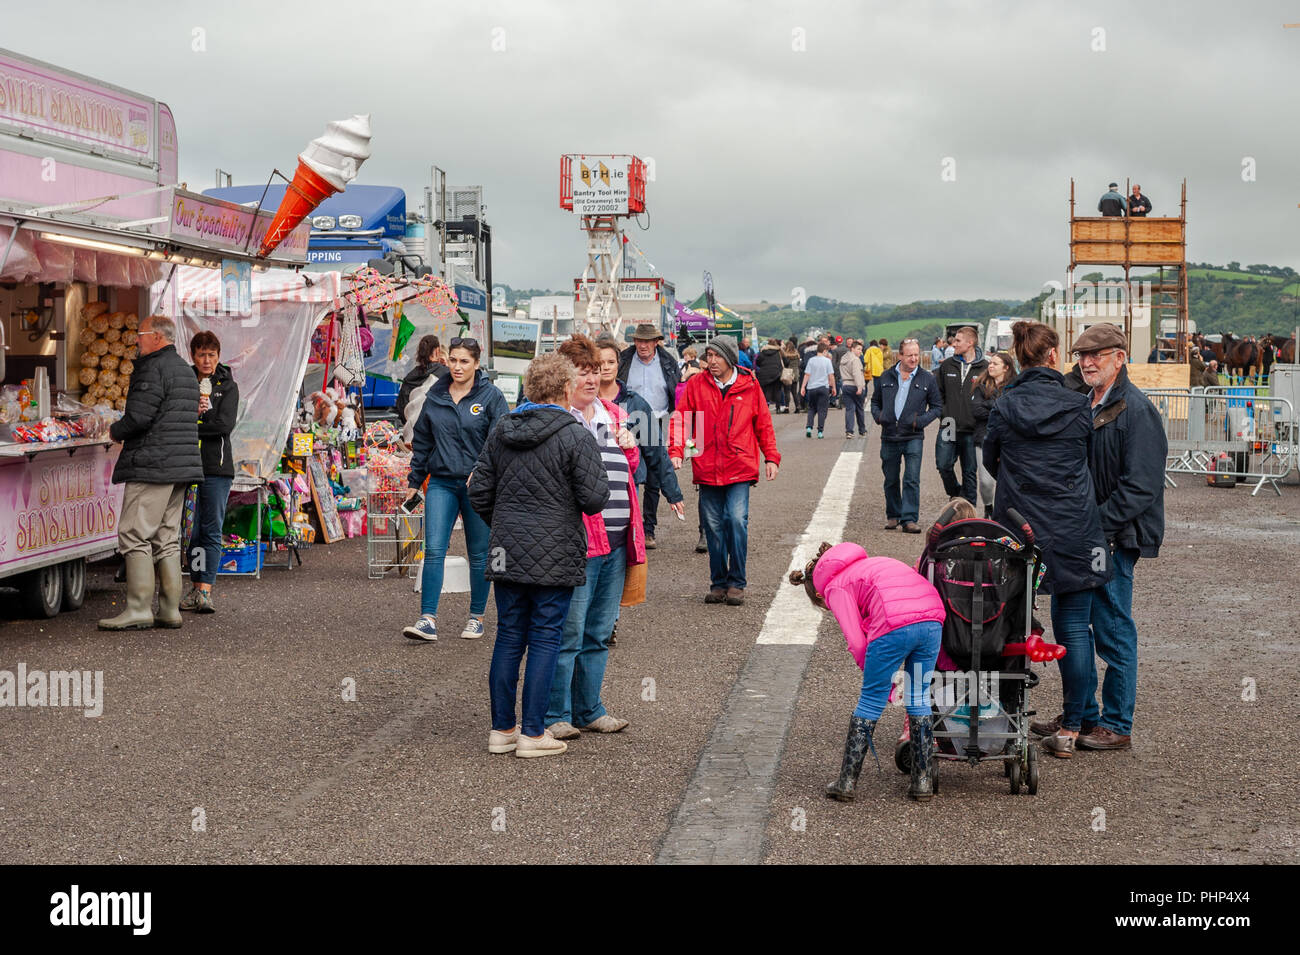 Bantry, West Cork, Ireland. 2nd Sept, 2018. Bantry Agricultural Show is taking place at the Bantry Airstrip today in appalling weather. Big crowds are attending the show. Credit: AG News/Alamy Live News Stock Photo